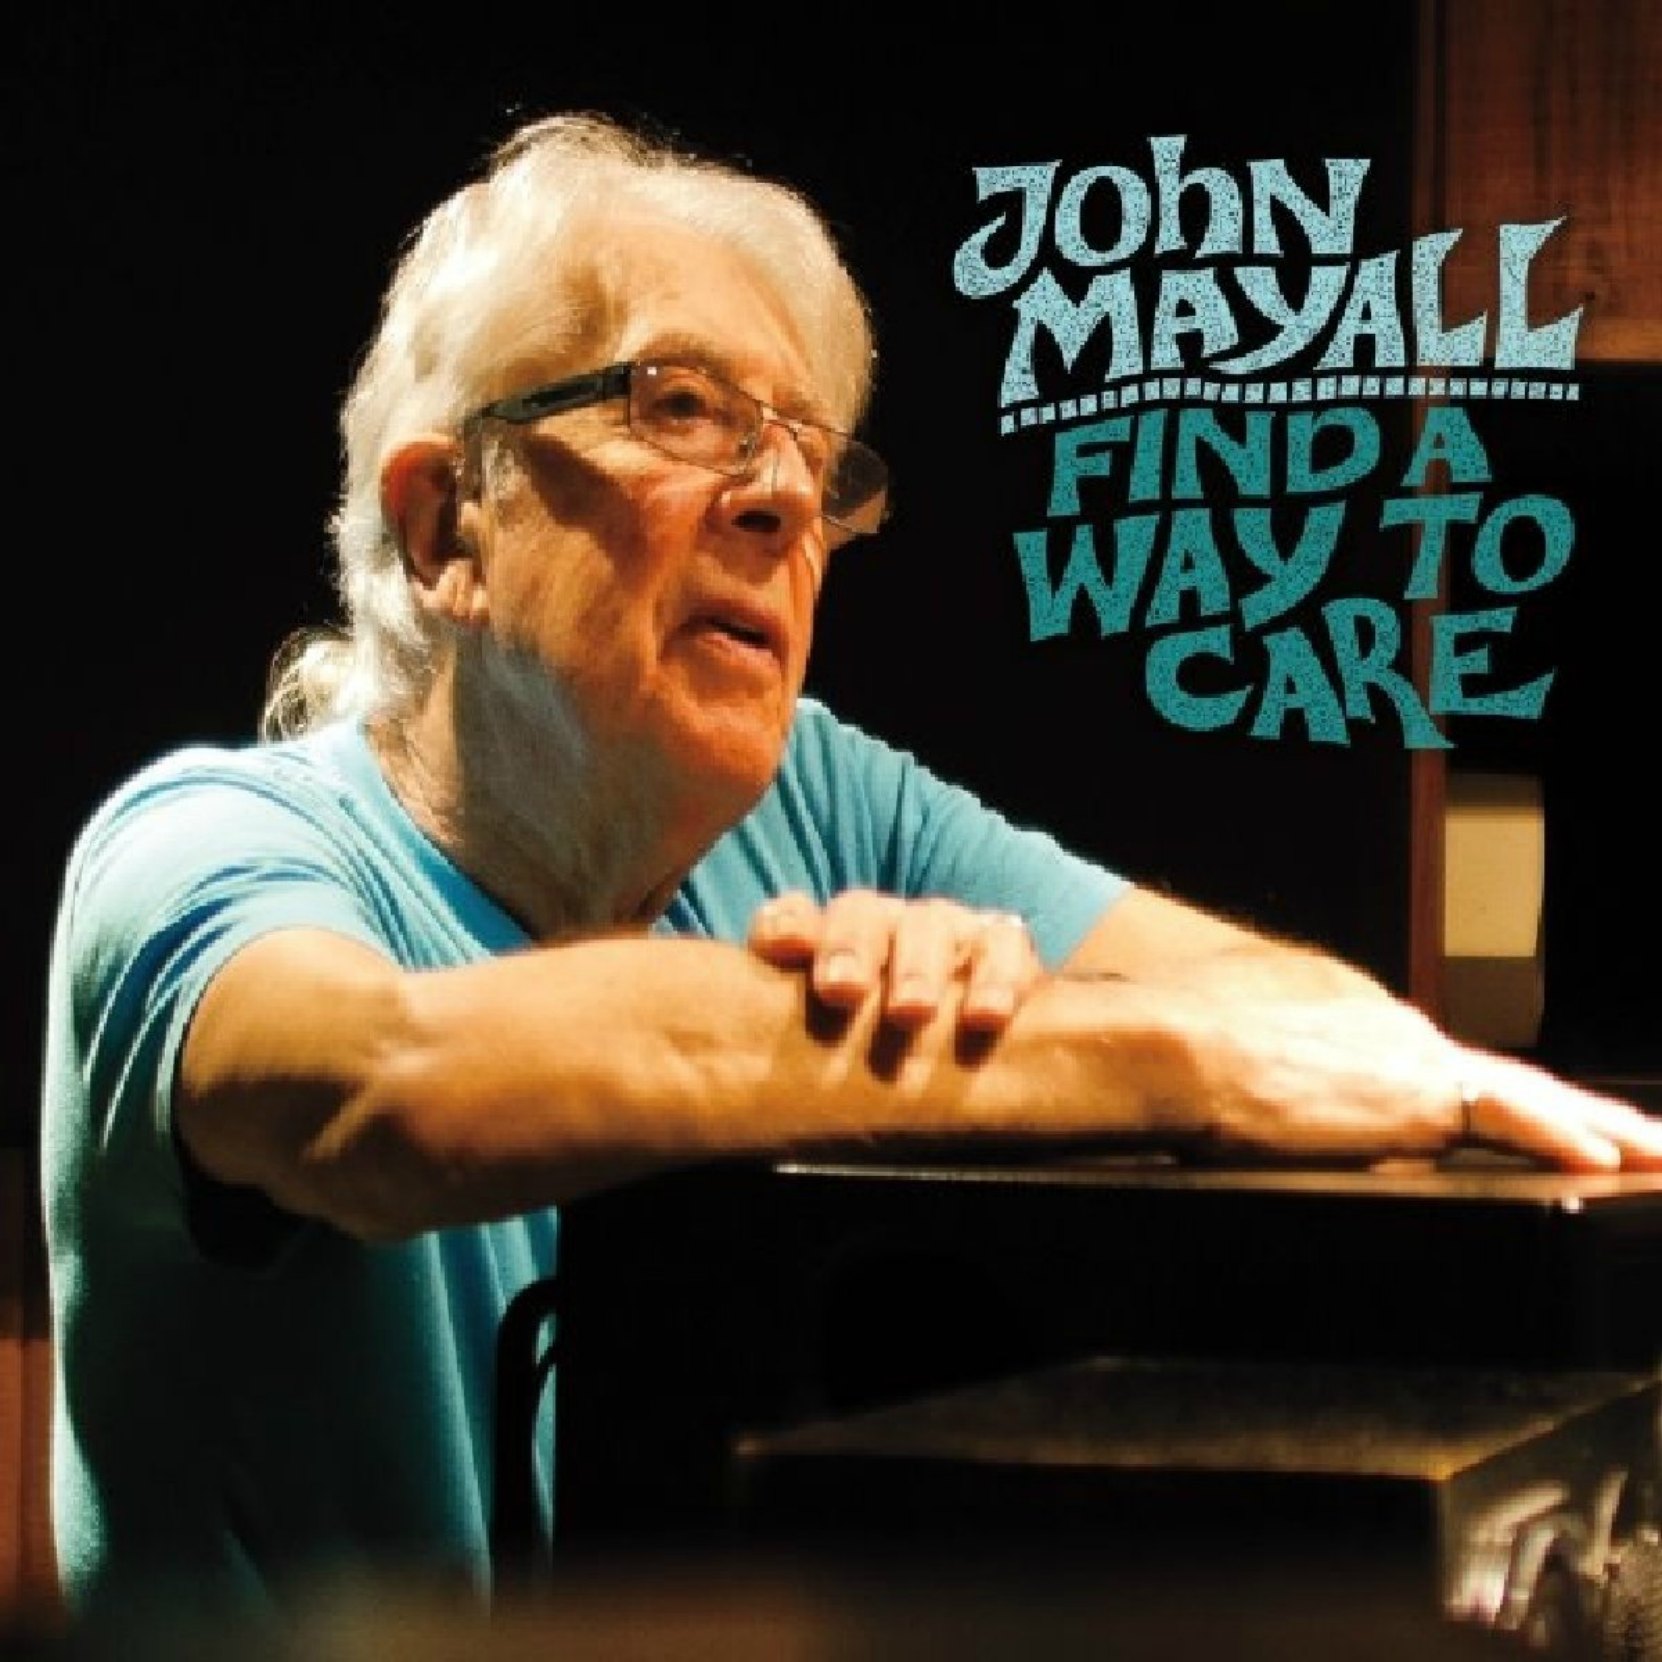 Album cover, John Mayall, Find A Way To Care, released in 2015